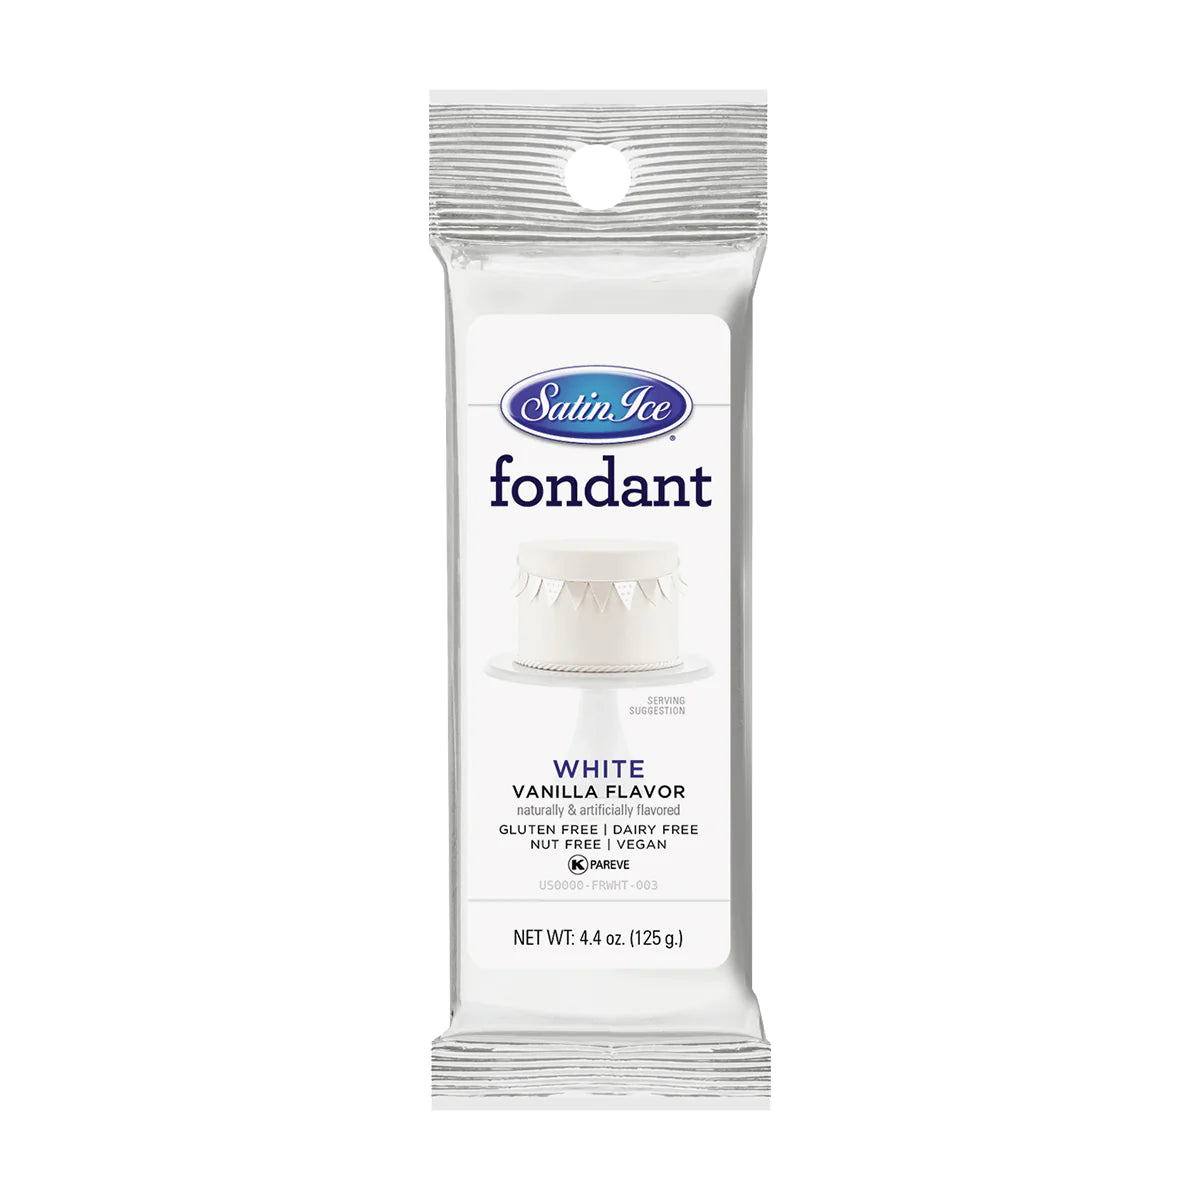 White Colored and Vanilla Flavored Fondant in a 4.4 Ounce Foil Pouch